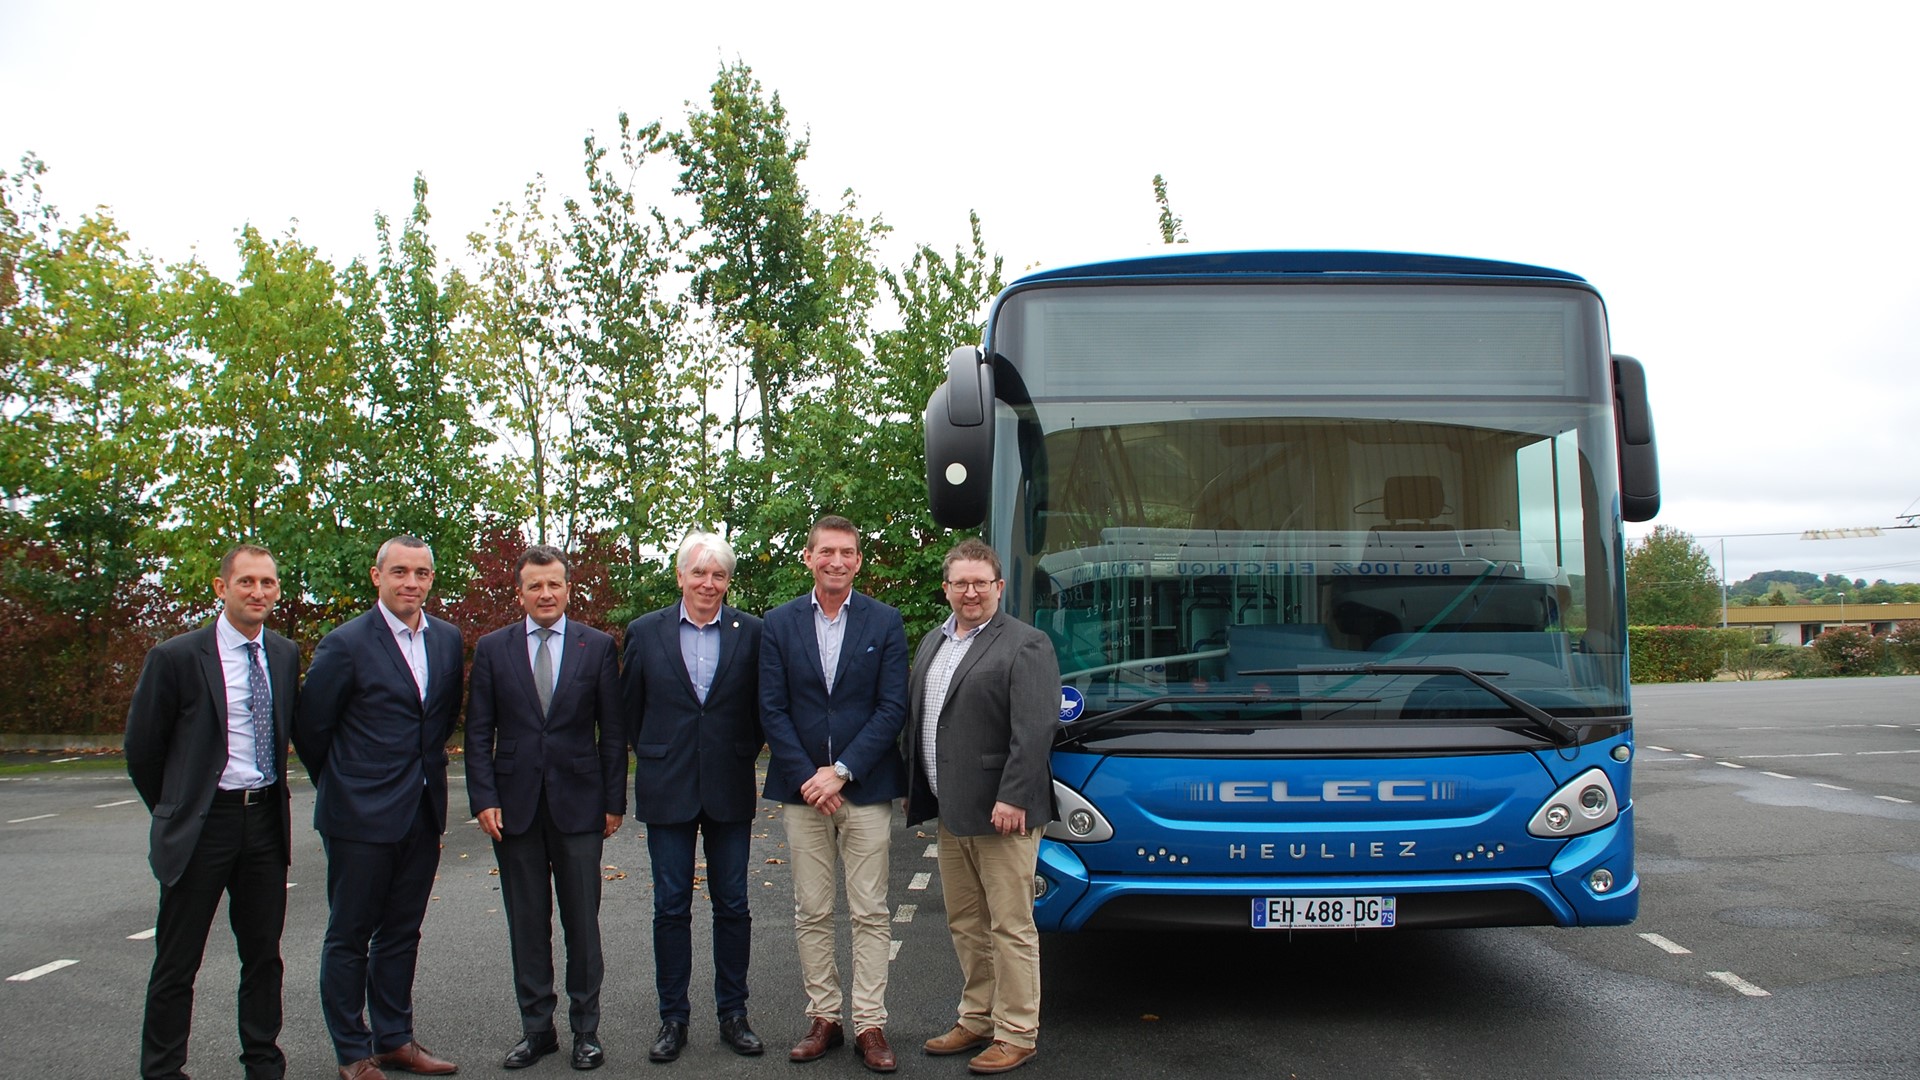 Representatives from TIDE BUSS, HEULIEZ BUS and IVECO Norge with the GX 437 ELEC